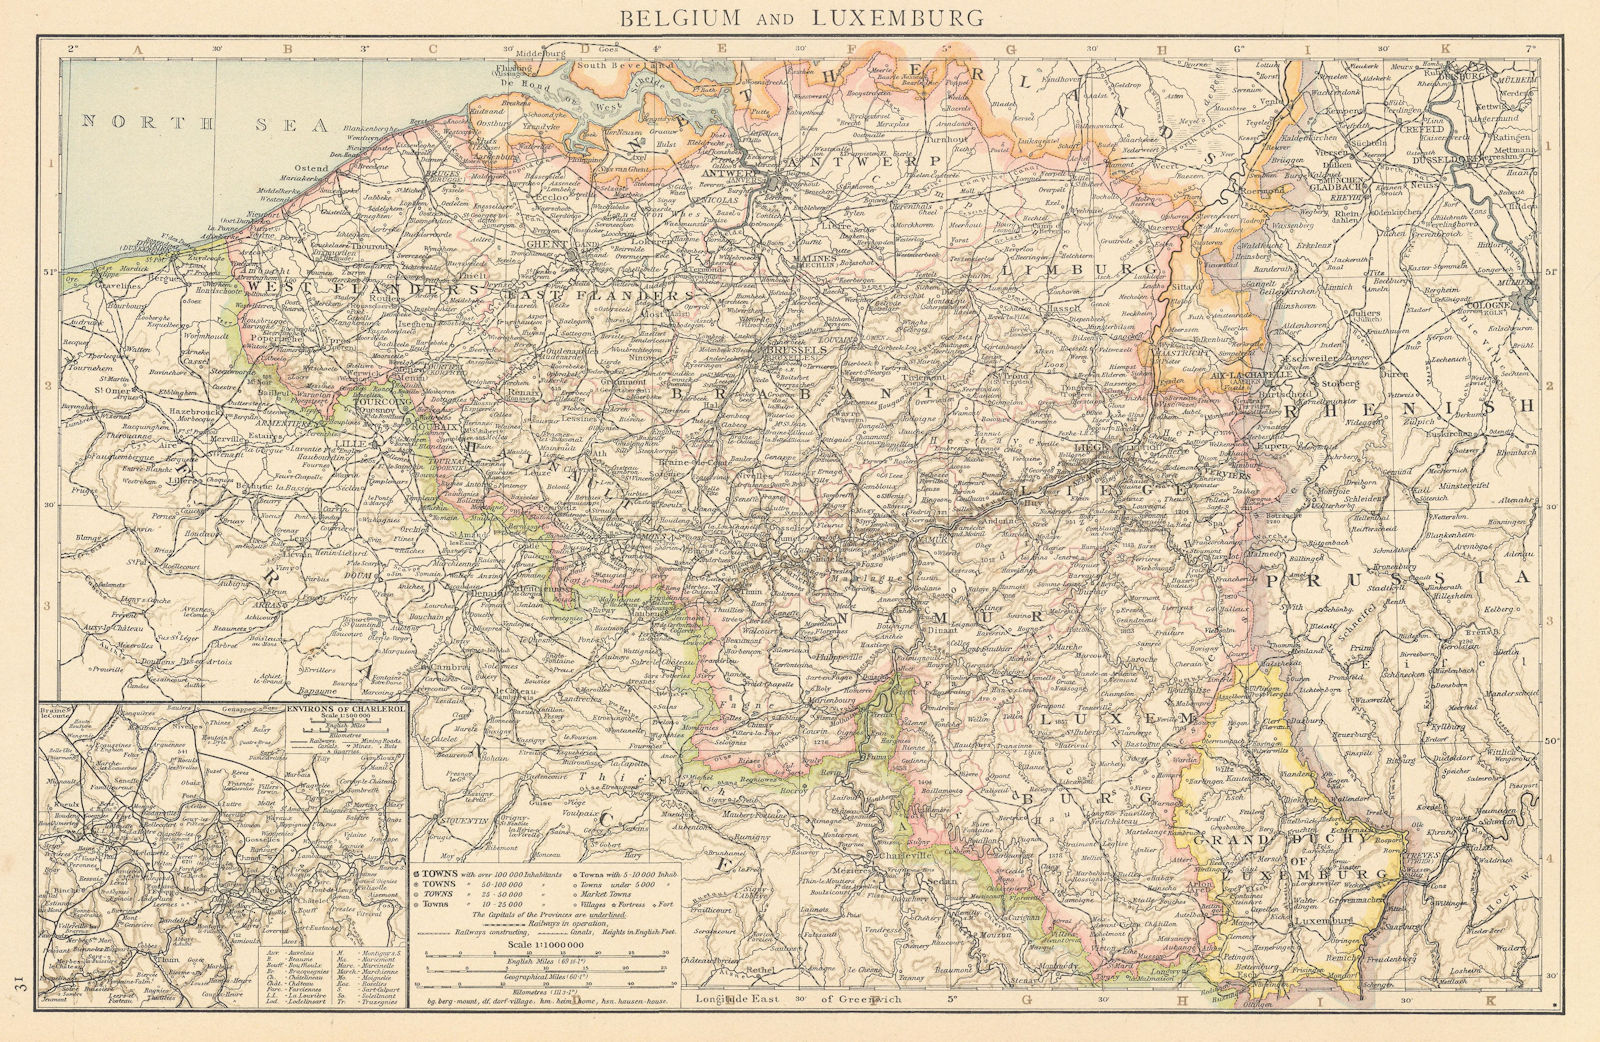 Associate Product Belgium and Luxemburg. Environs of Charleroi. THE TIMES 1895 old antique map